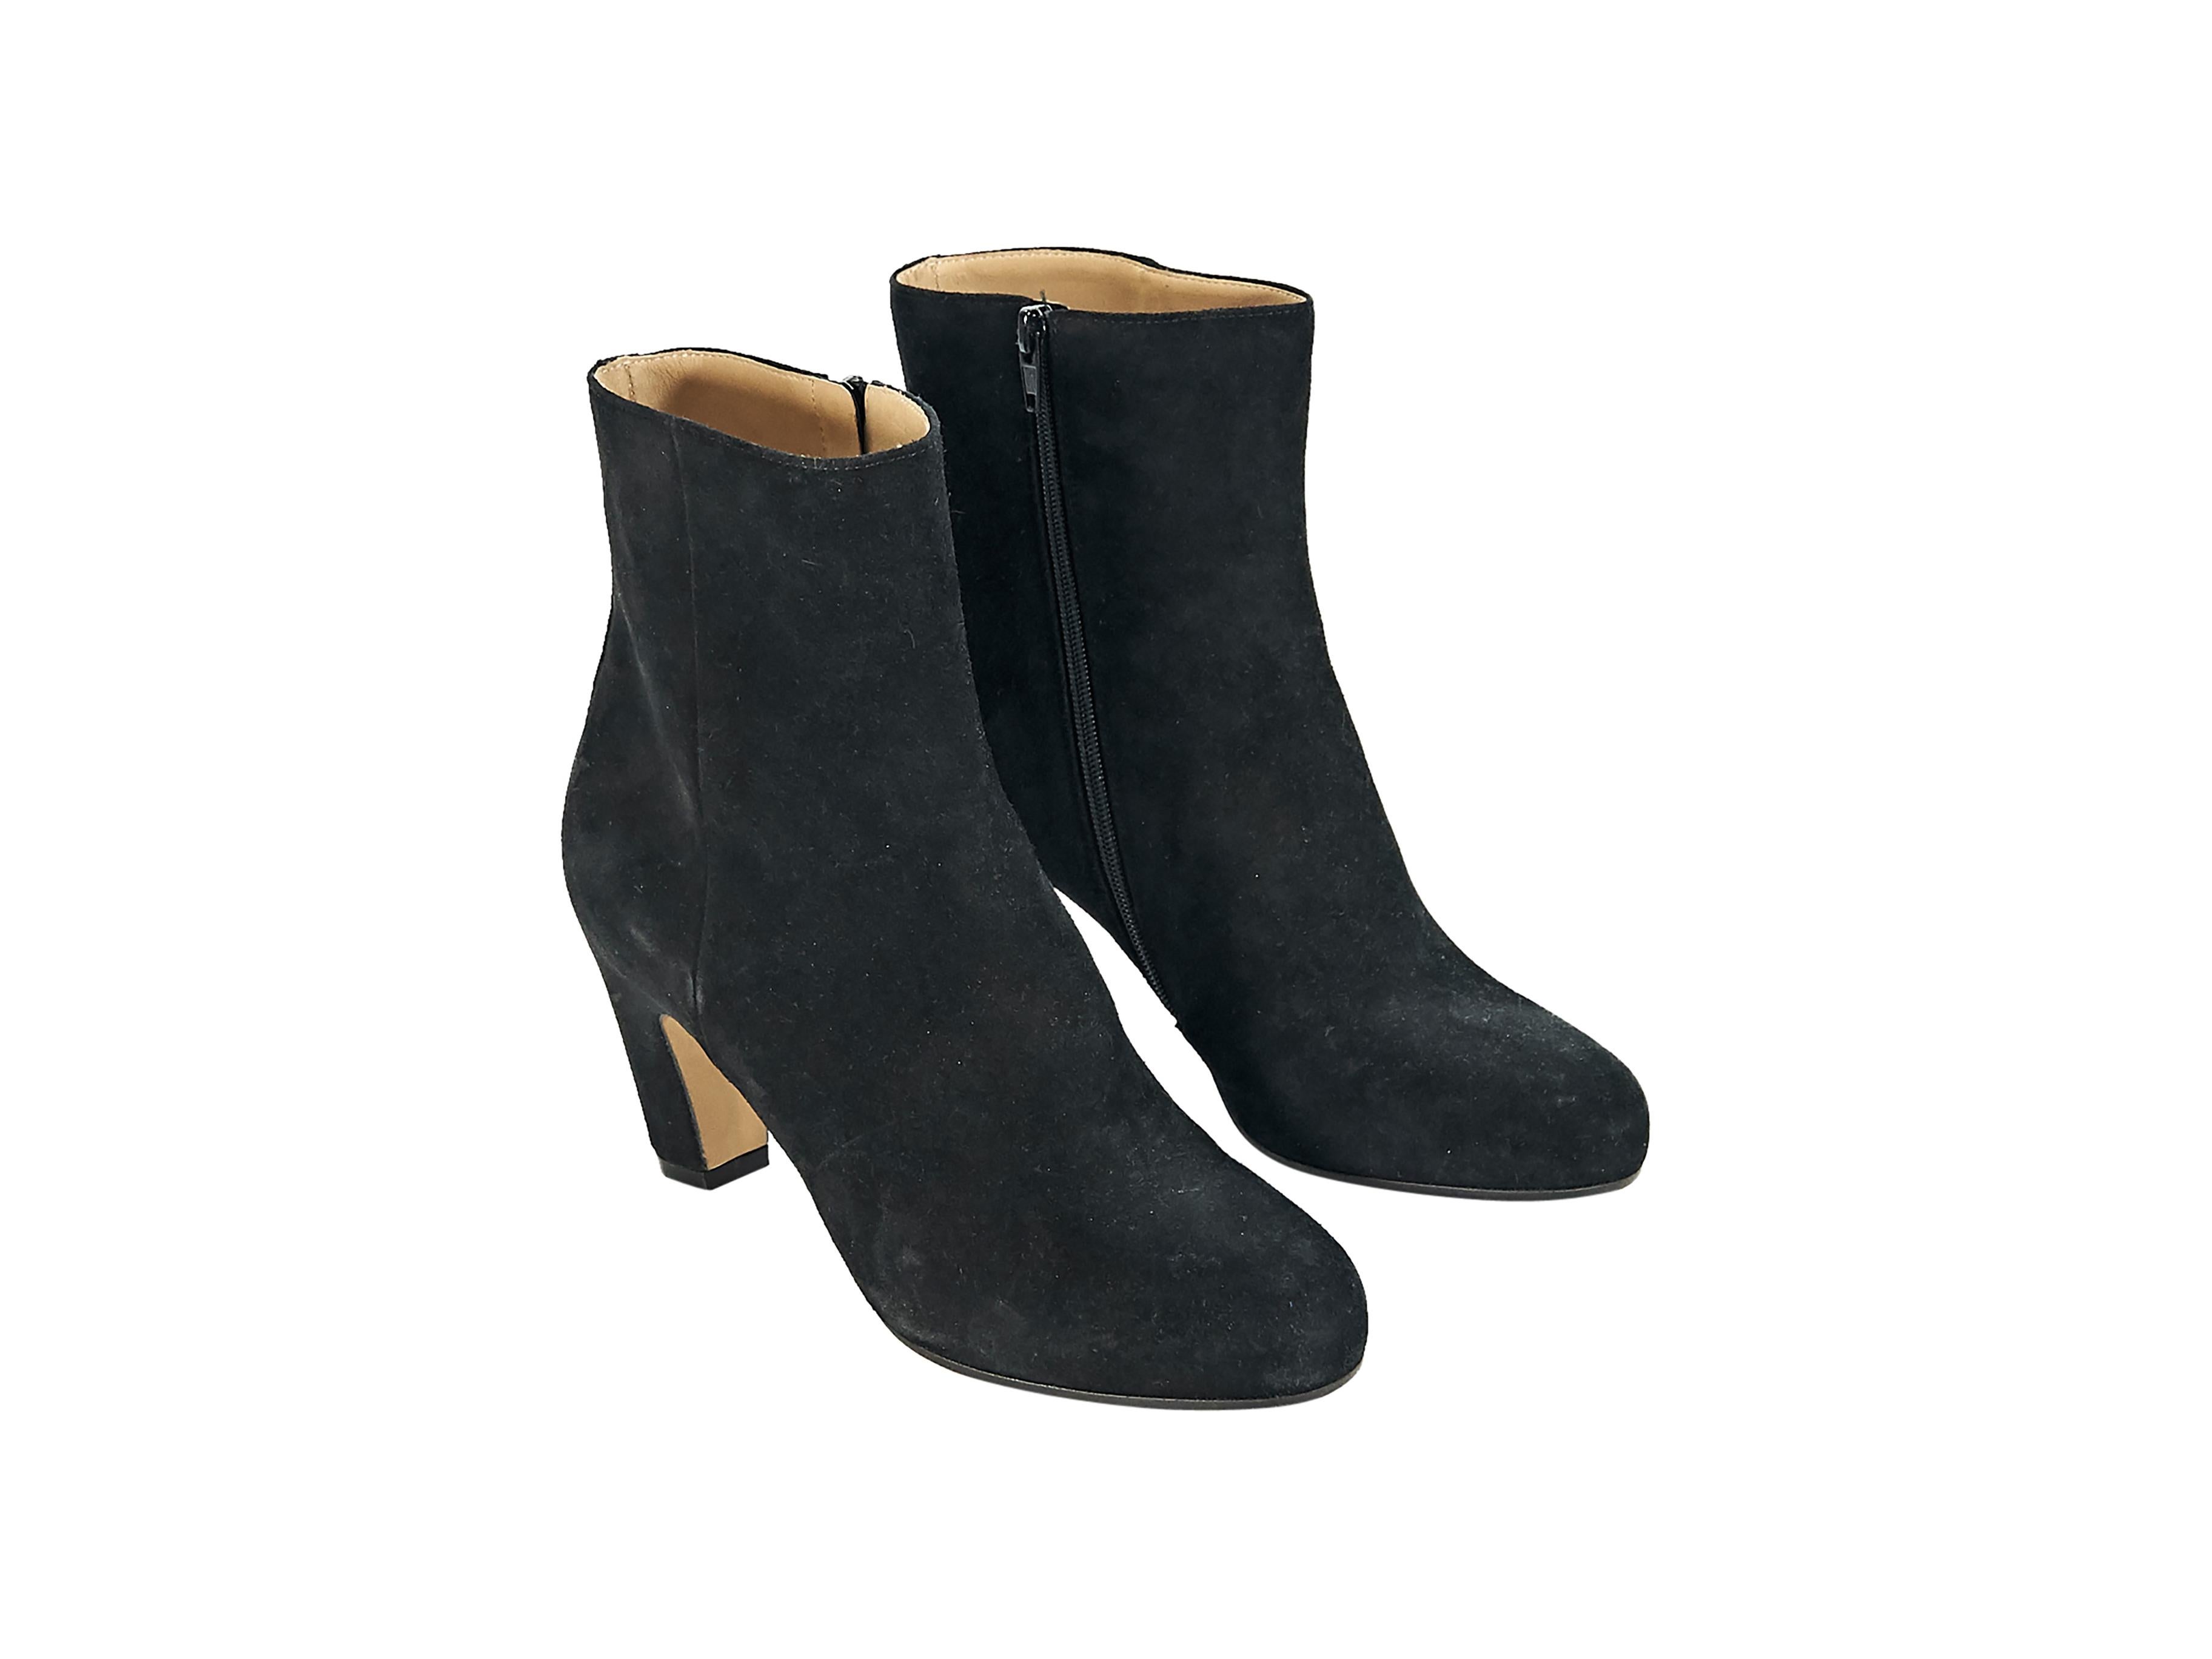 Product details:  Black suede ankle boots by Maison Martin Margiela.  Inner zip closure.  Round toe.  3